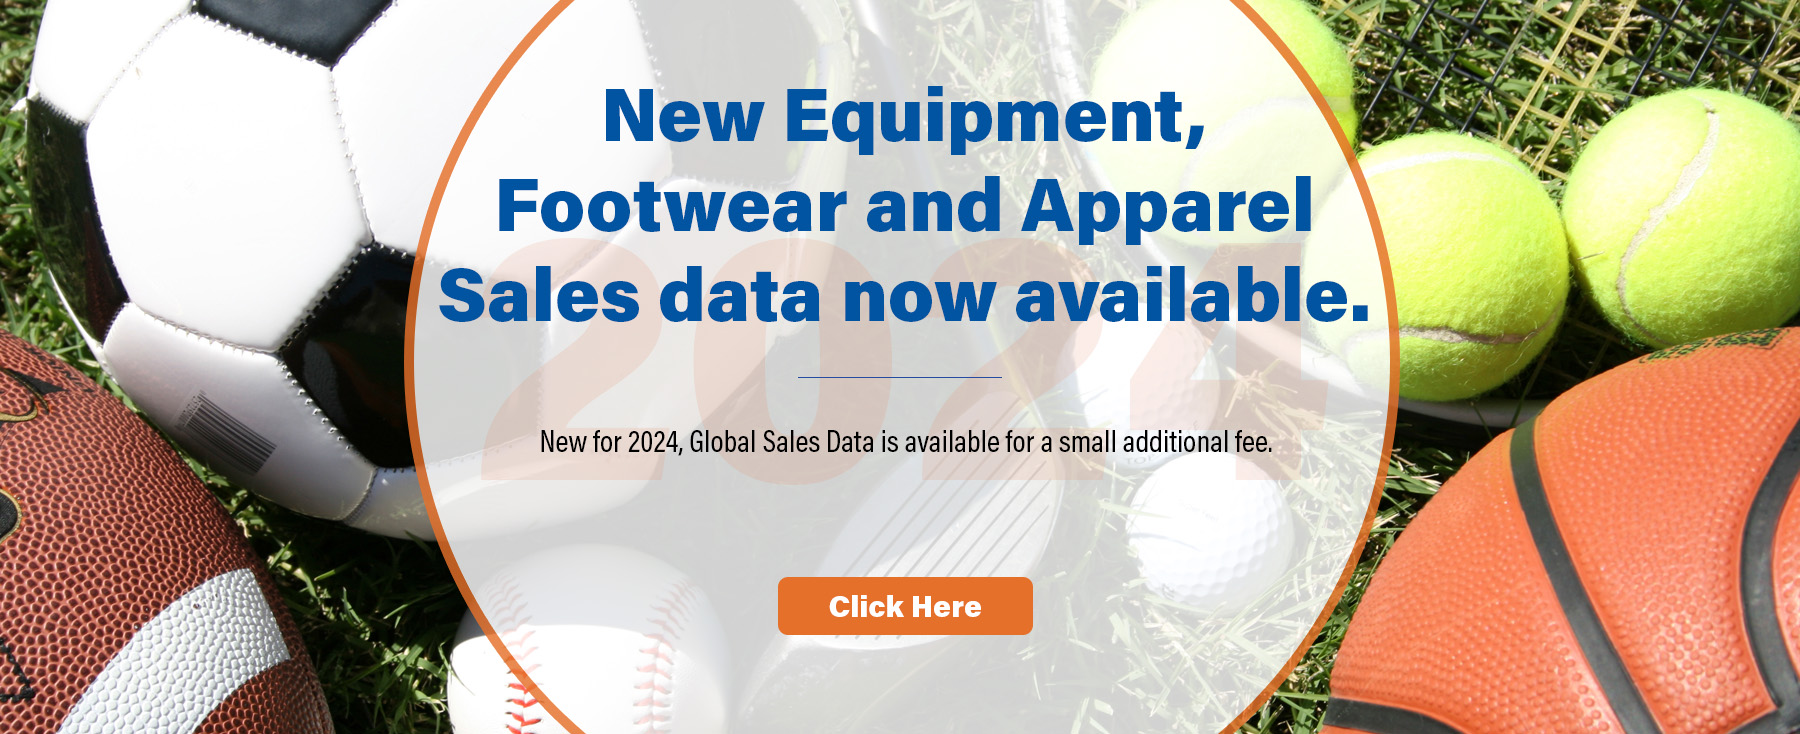 New Equipment, Footwear and Apparel Sales data now available